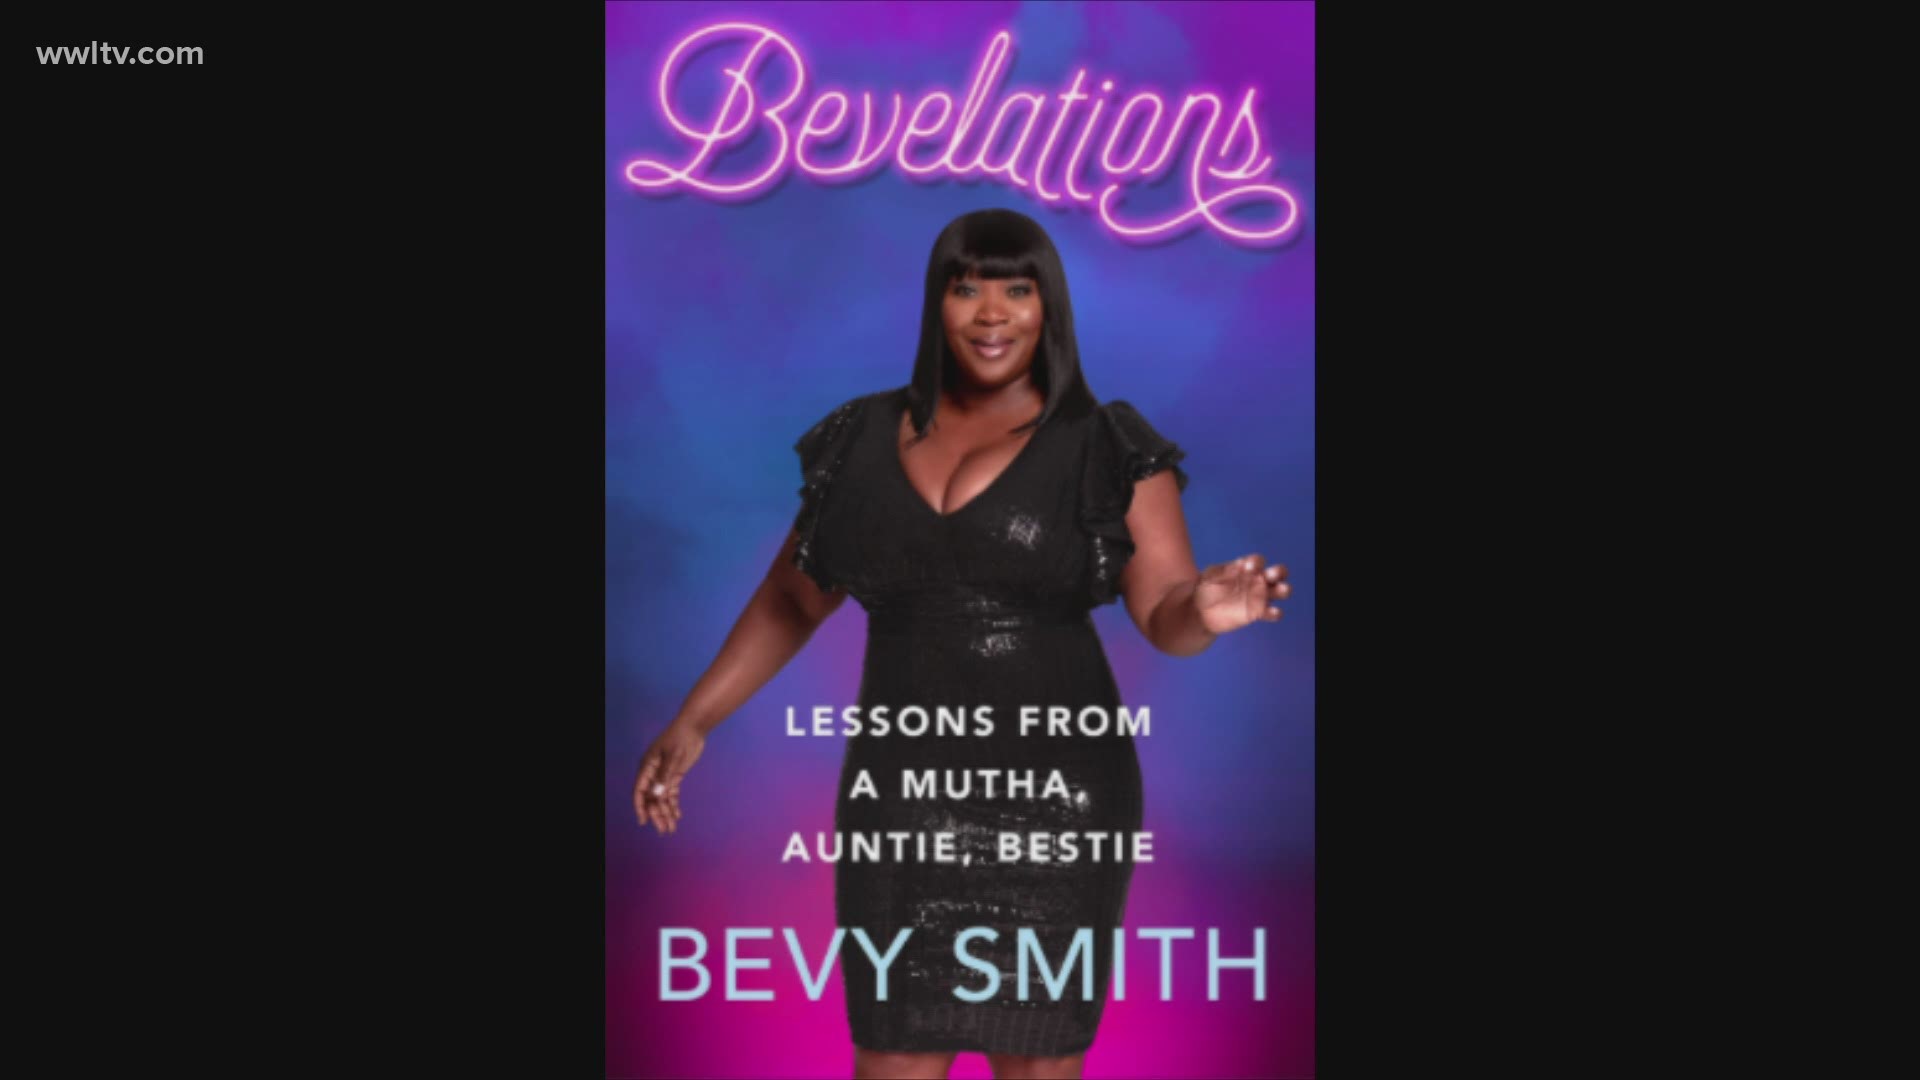 "I just wrote a book about all the lessons I've learned over the years," Bevy Smith said about her book. "I talk about creating your own personal brand."